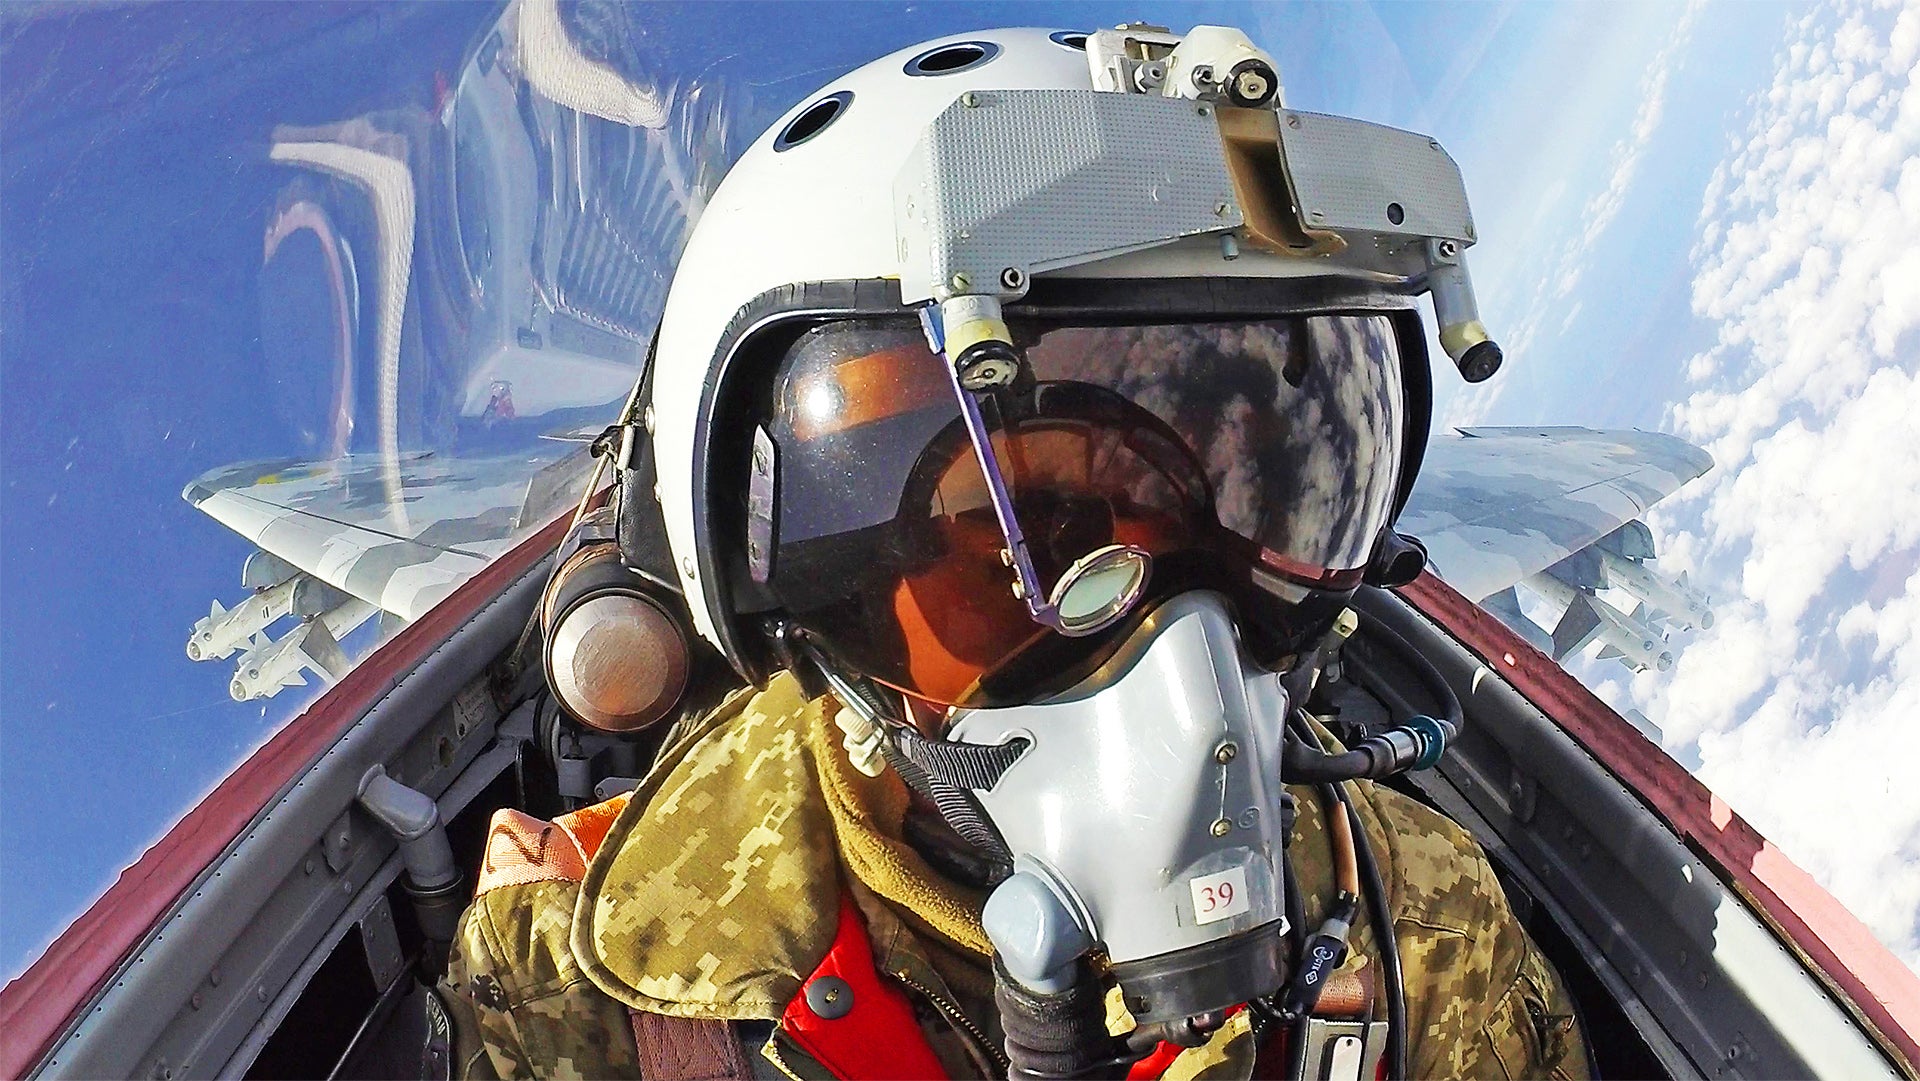 Ukrainian MiG-29 Pilot’s Front-Line Account Of The Air War Against Russia